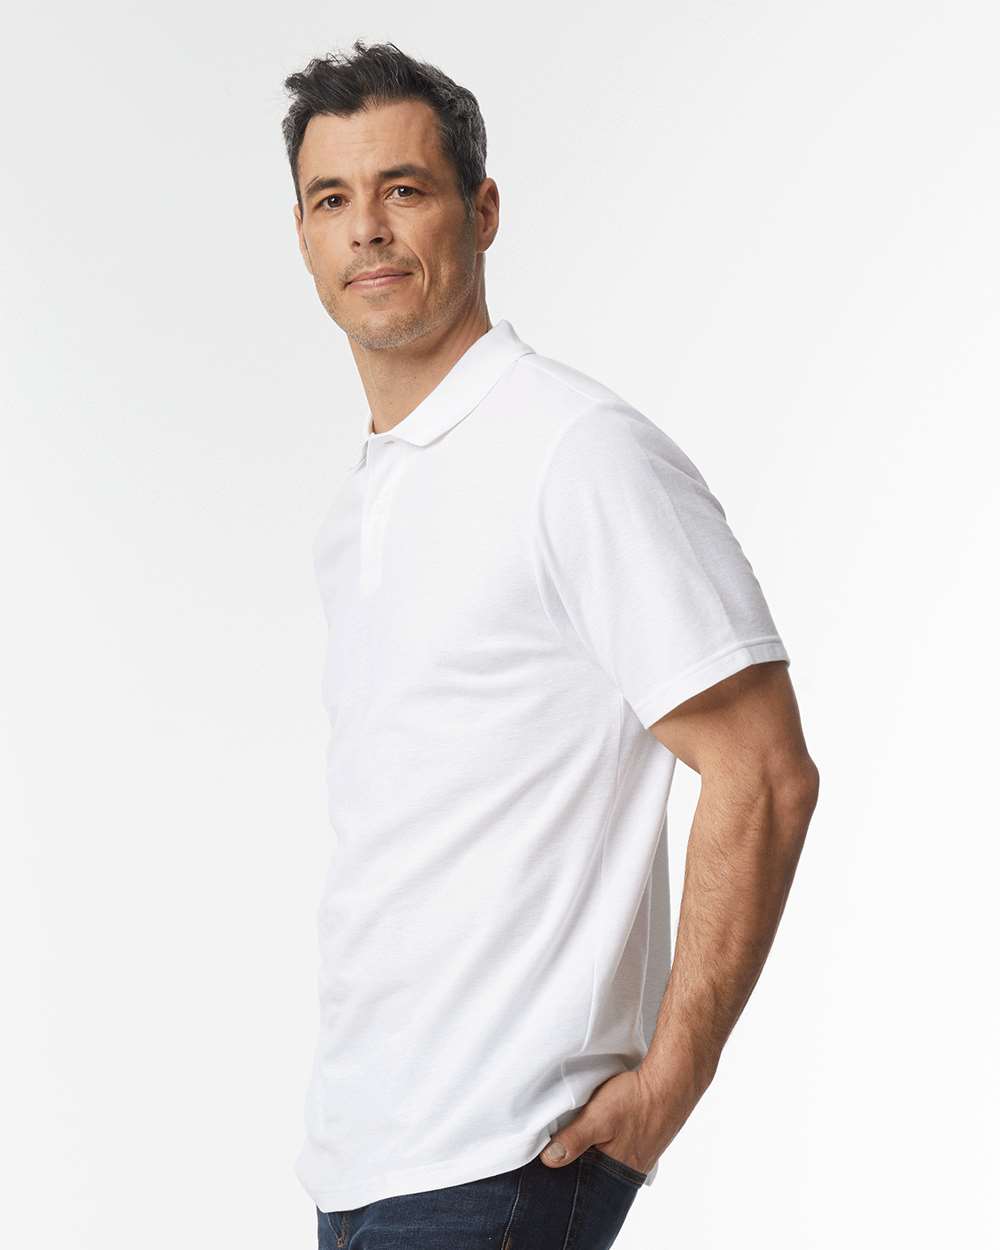 Gildan Softstyle® Adult Pique Polo 64800 #colormdl_White